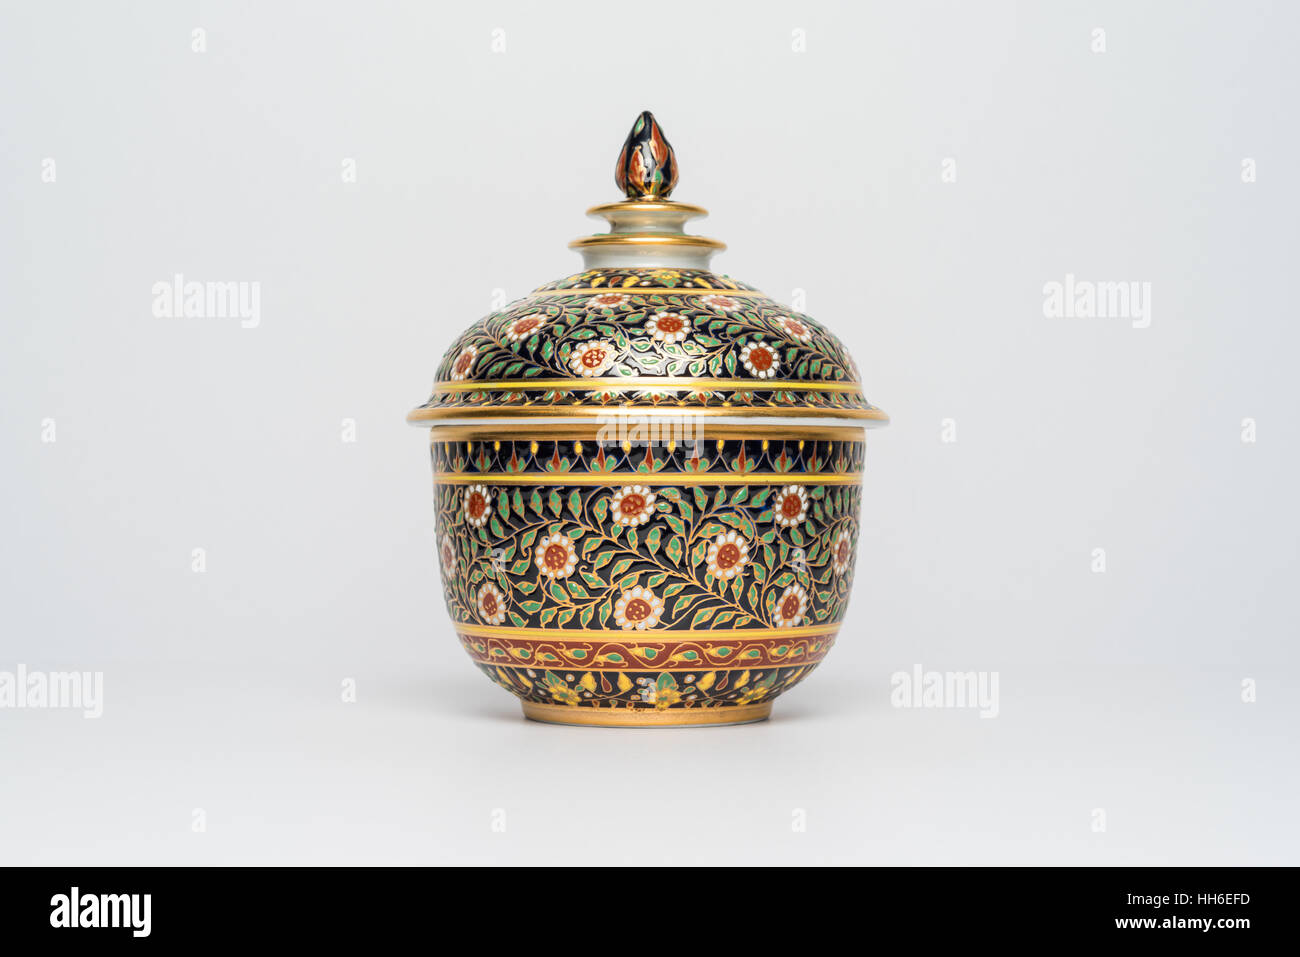 Chinese traditional ceramic vessels pot with Flowers ornament, Isolated. Stock Photo